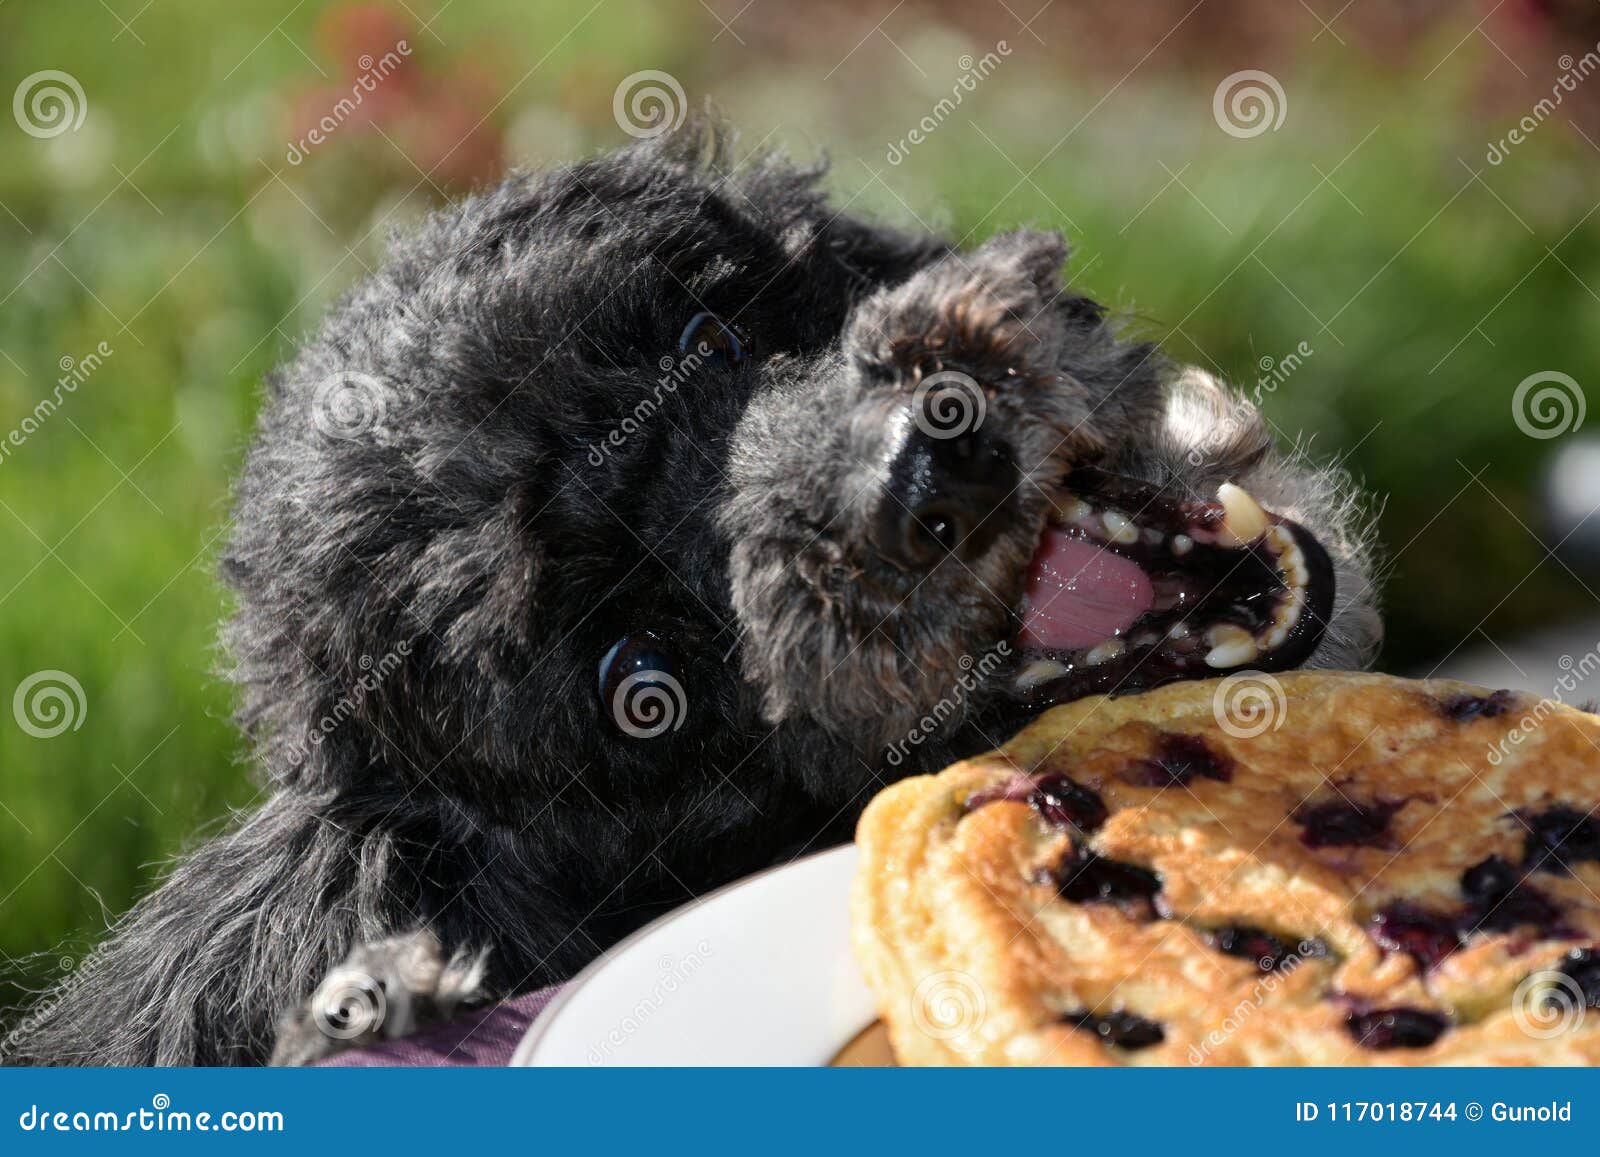 dog tries to steal a pancake